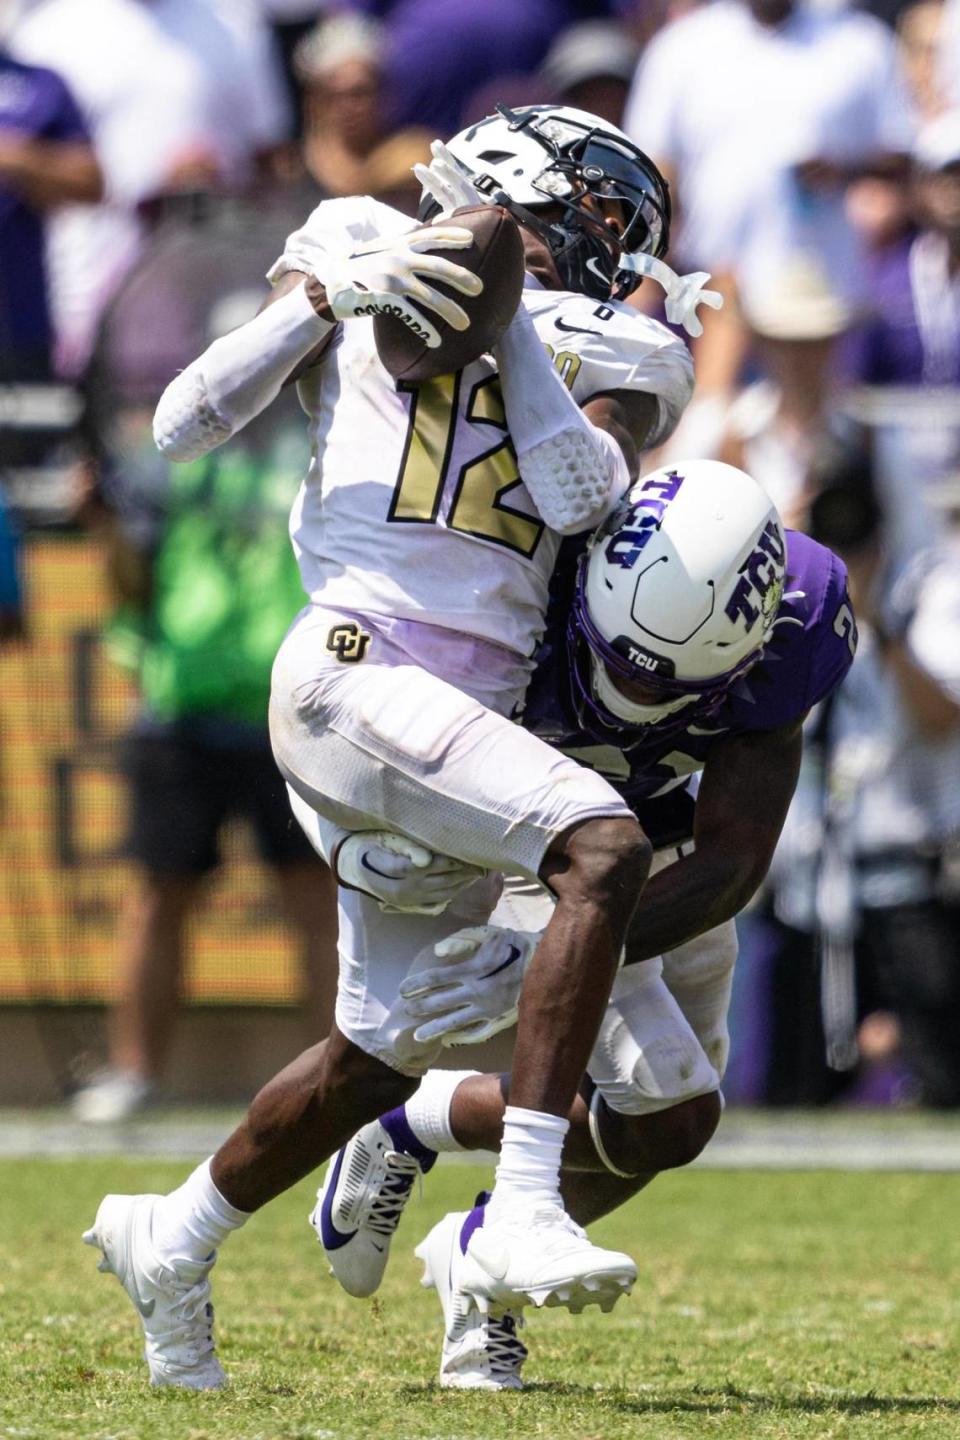 Colorado wide receiver Travis Hunter (12) catches a deep pass in the fourth quarter of a college football game between the TCU Horned Frogs and the Colorado Buffaloes at Amon G. Carter Stadium in Fort Worth on Saturday, Sept. 2, 2023.